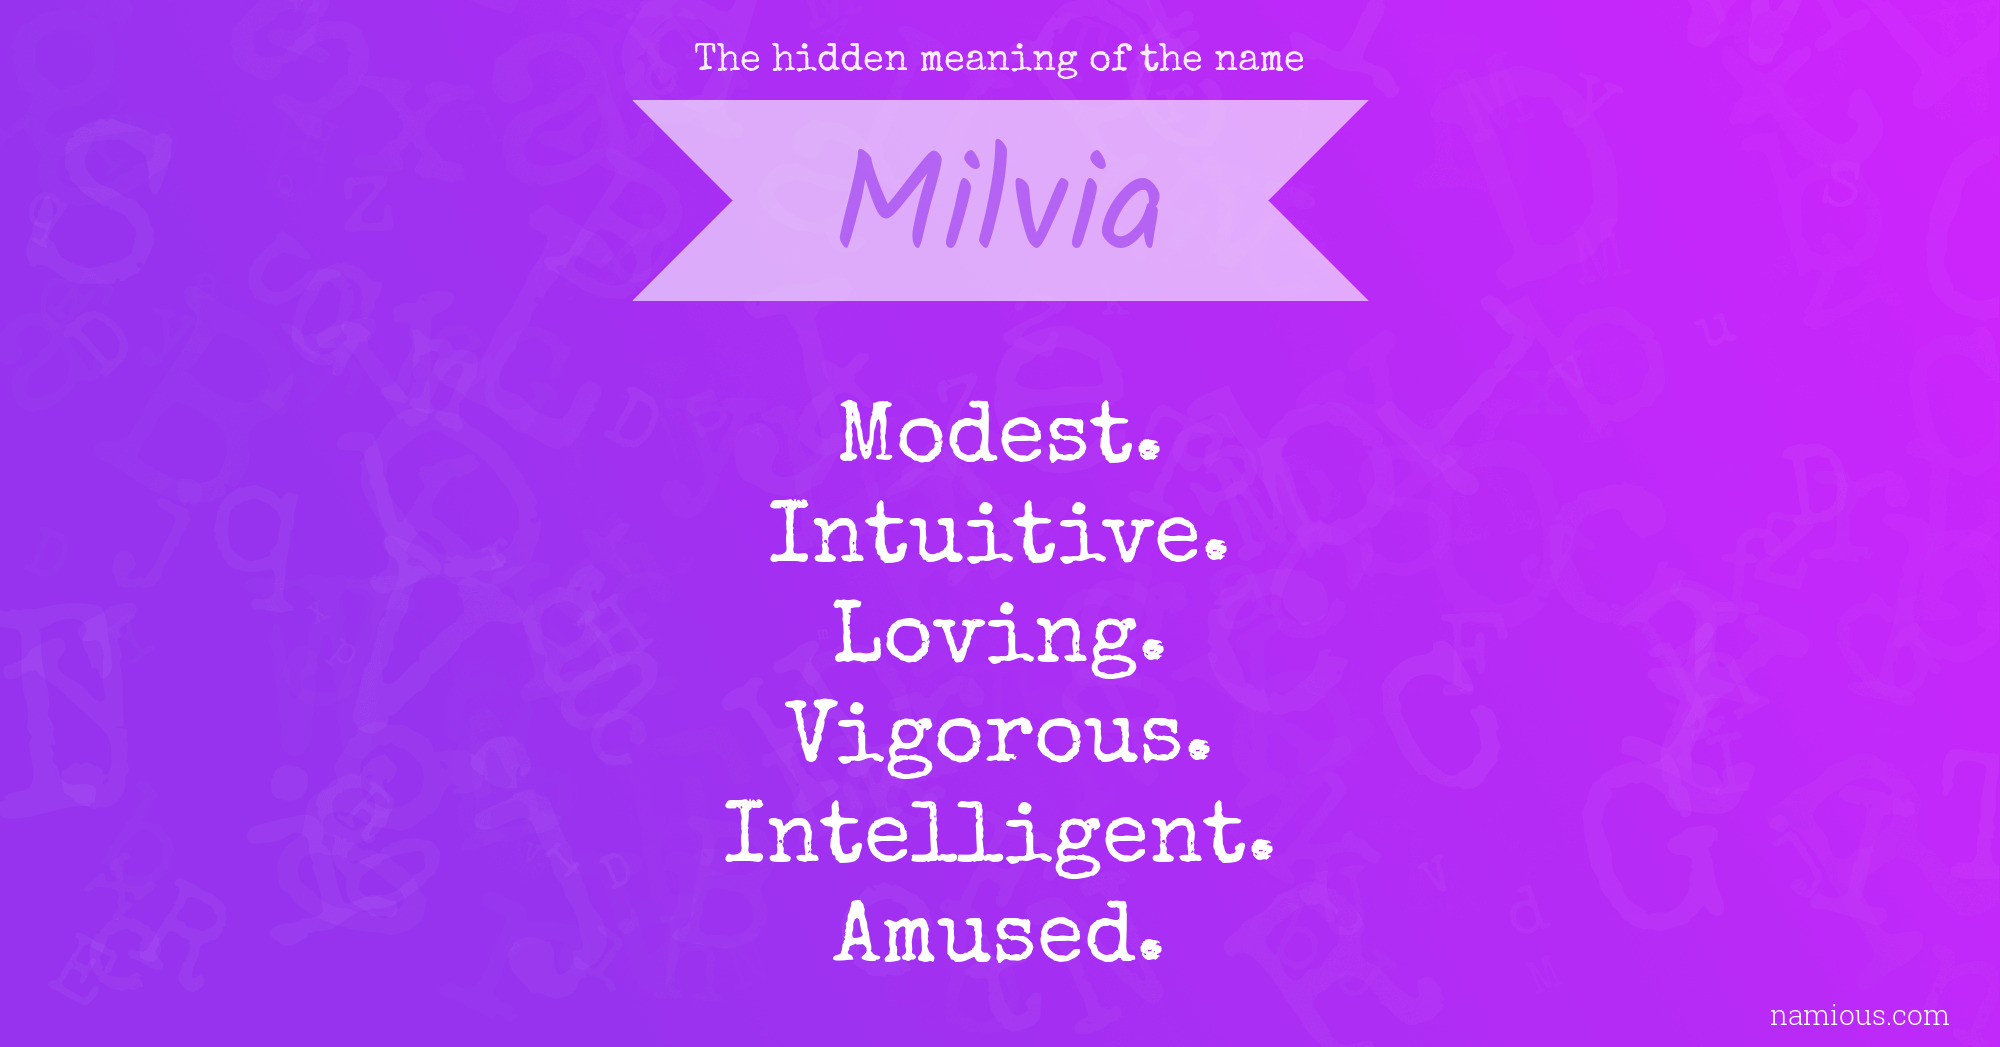 The hidden meaning of the name Milvia